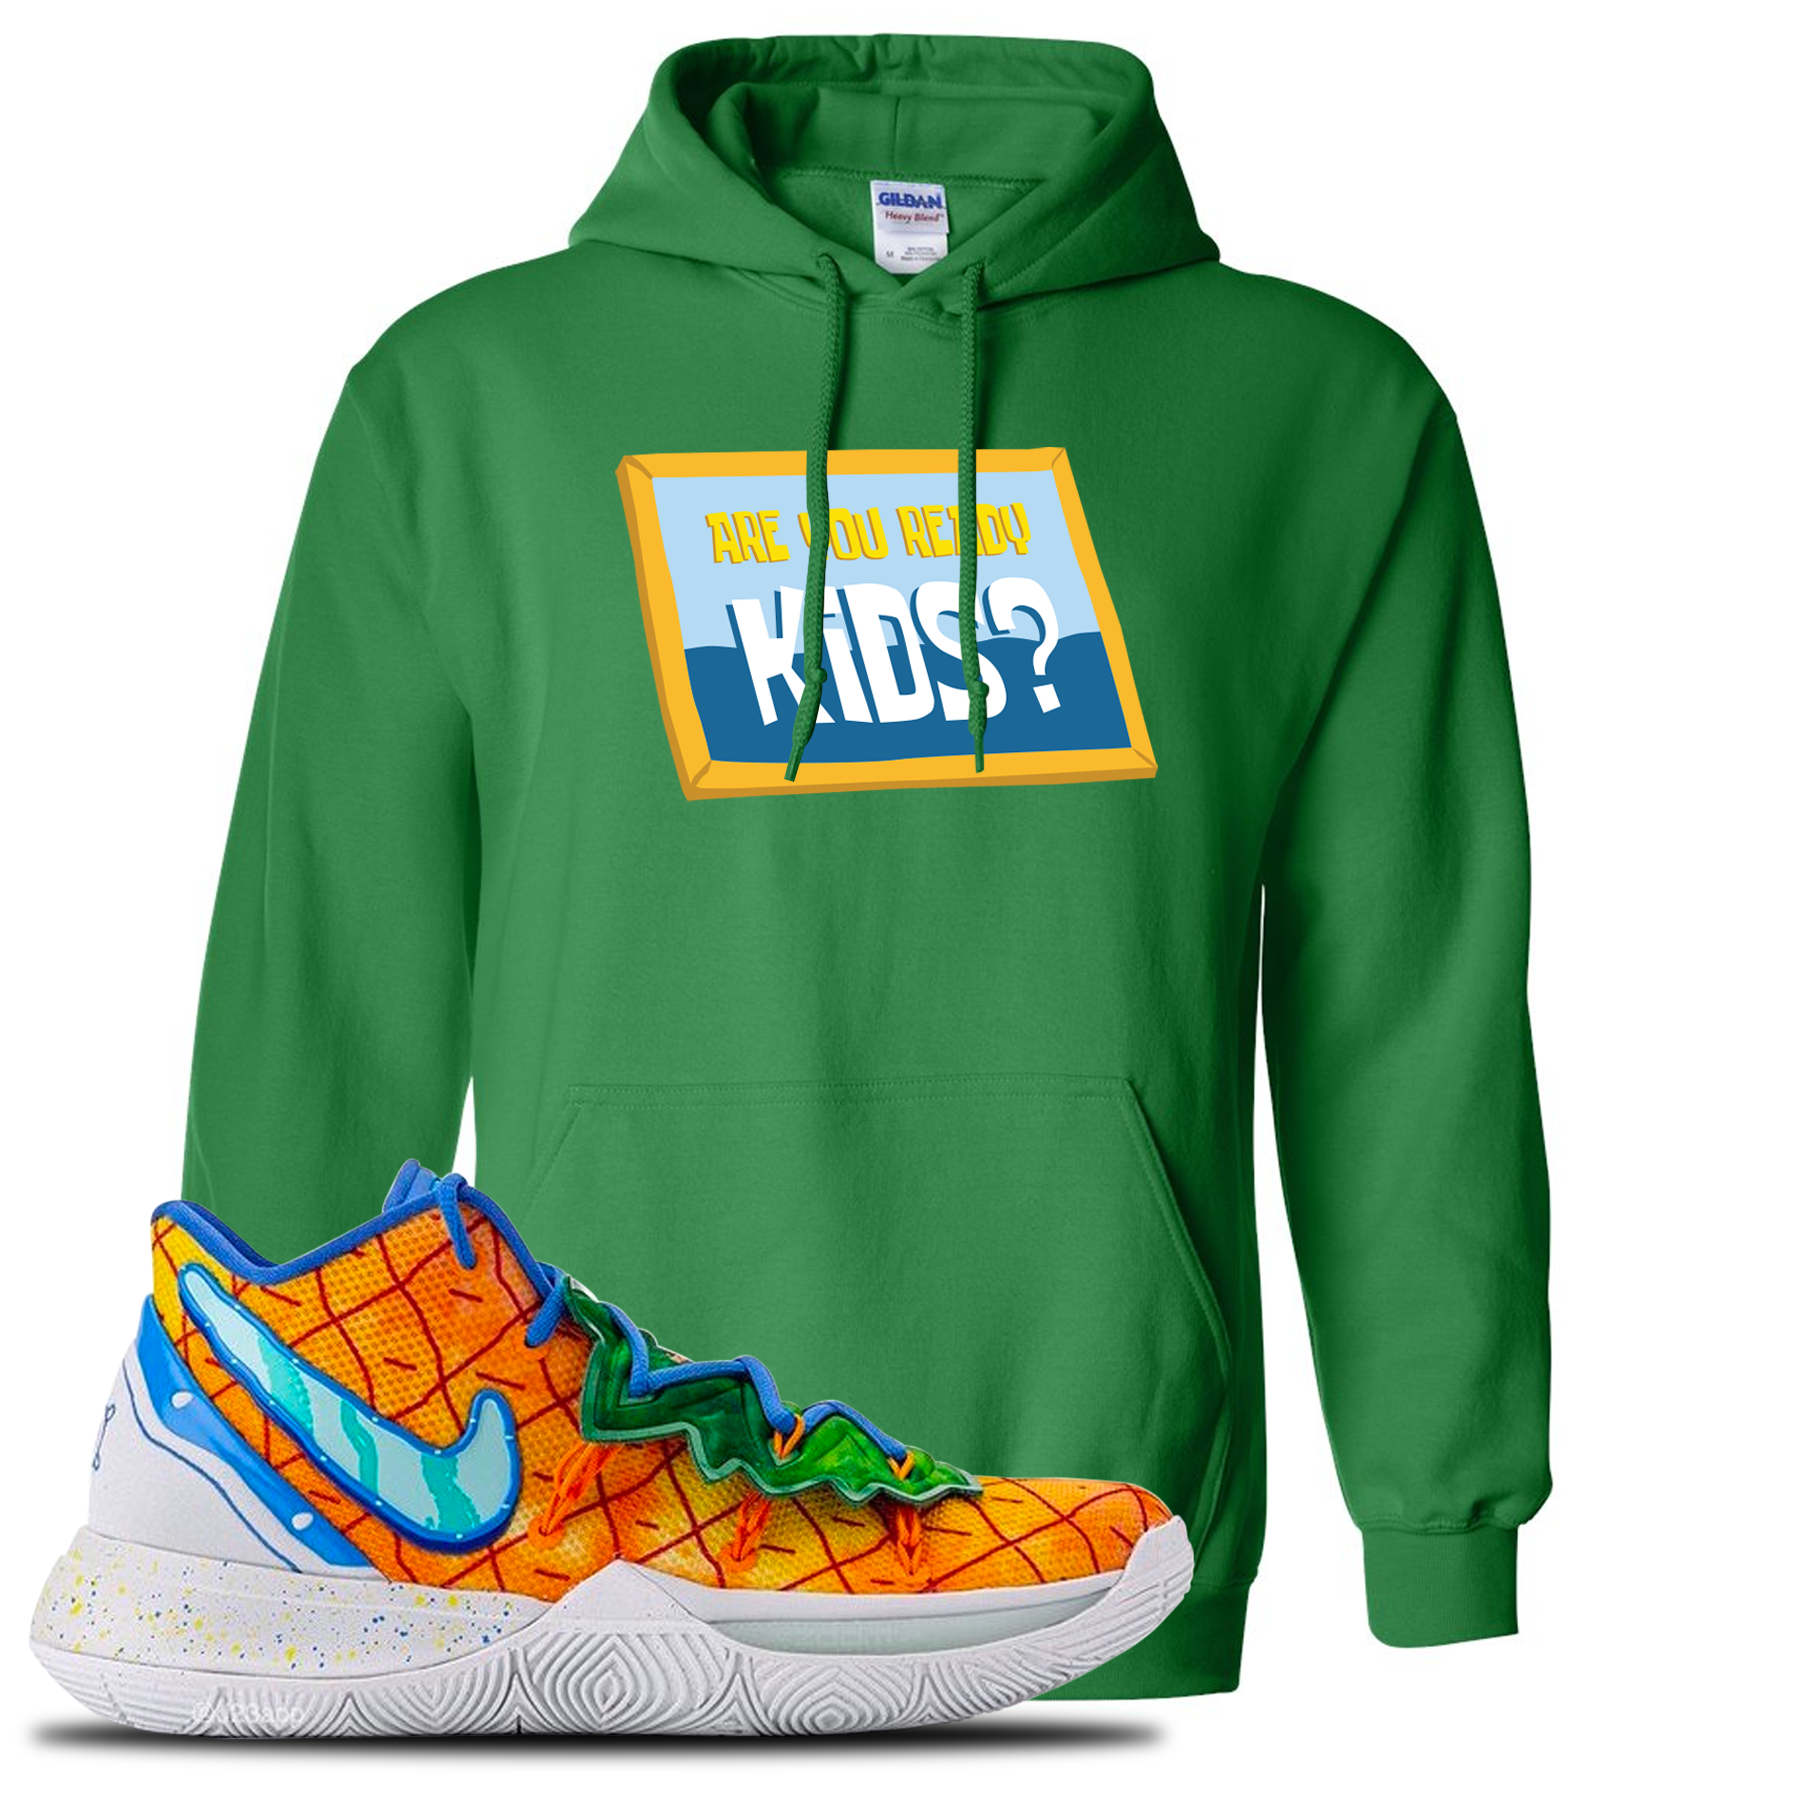 Kyrie 5 Pineapple House Are You Ready Kids? Irish Green Sneaker Hook Up Pullover Hoodie